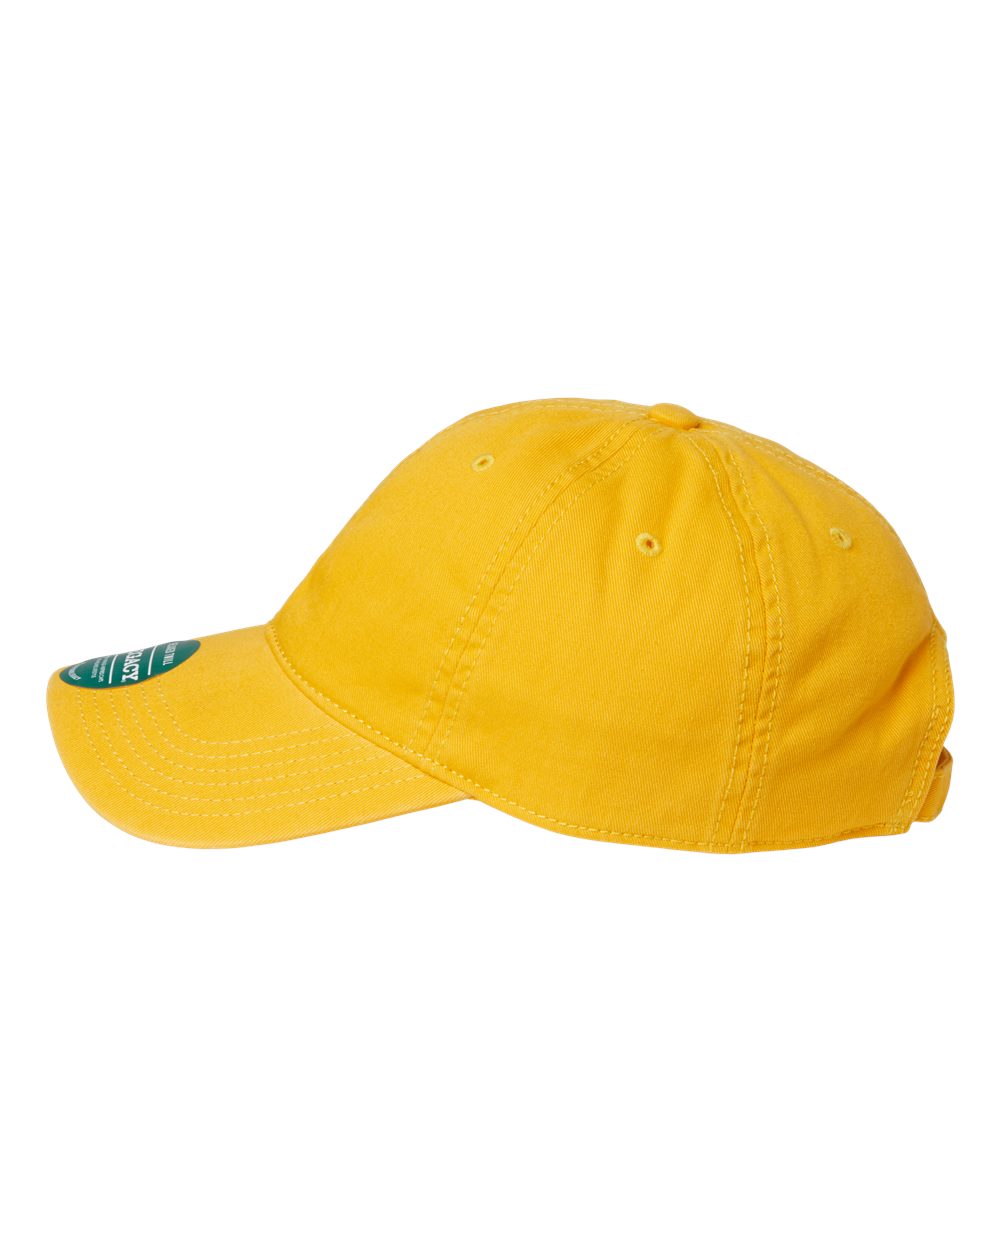 FREIGHT TRAIN LACROSSE CLUB "THE FERRICK" DAD HAT - GOLD